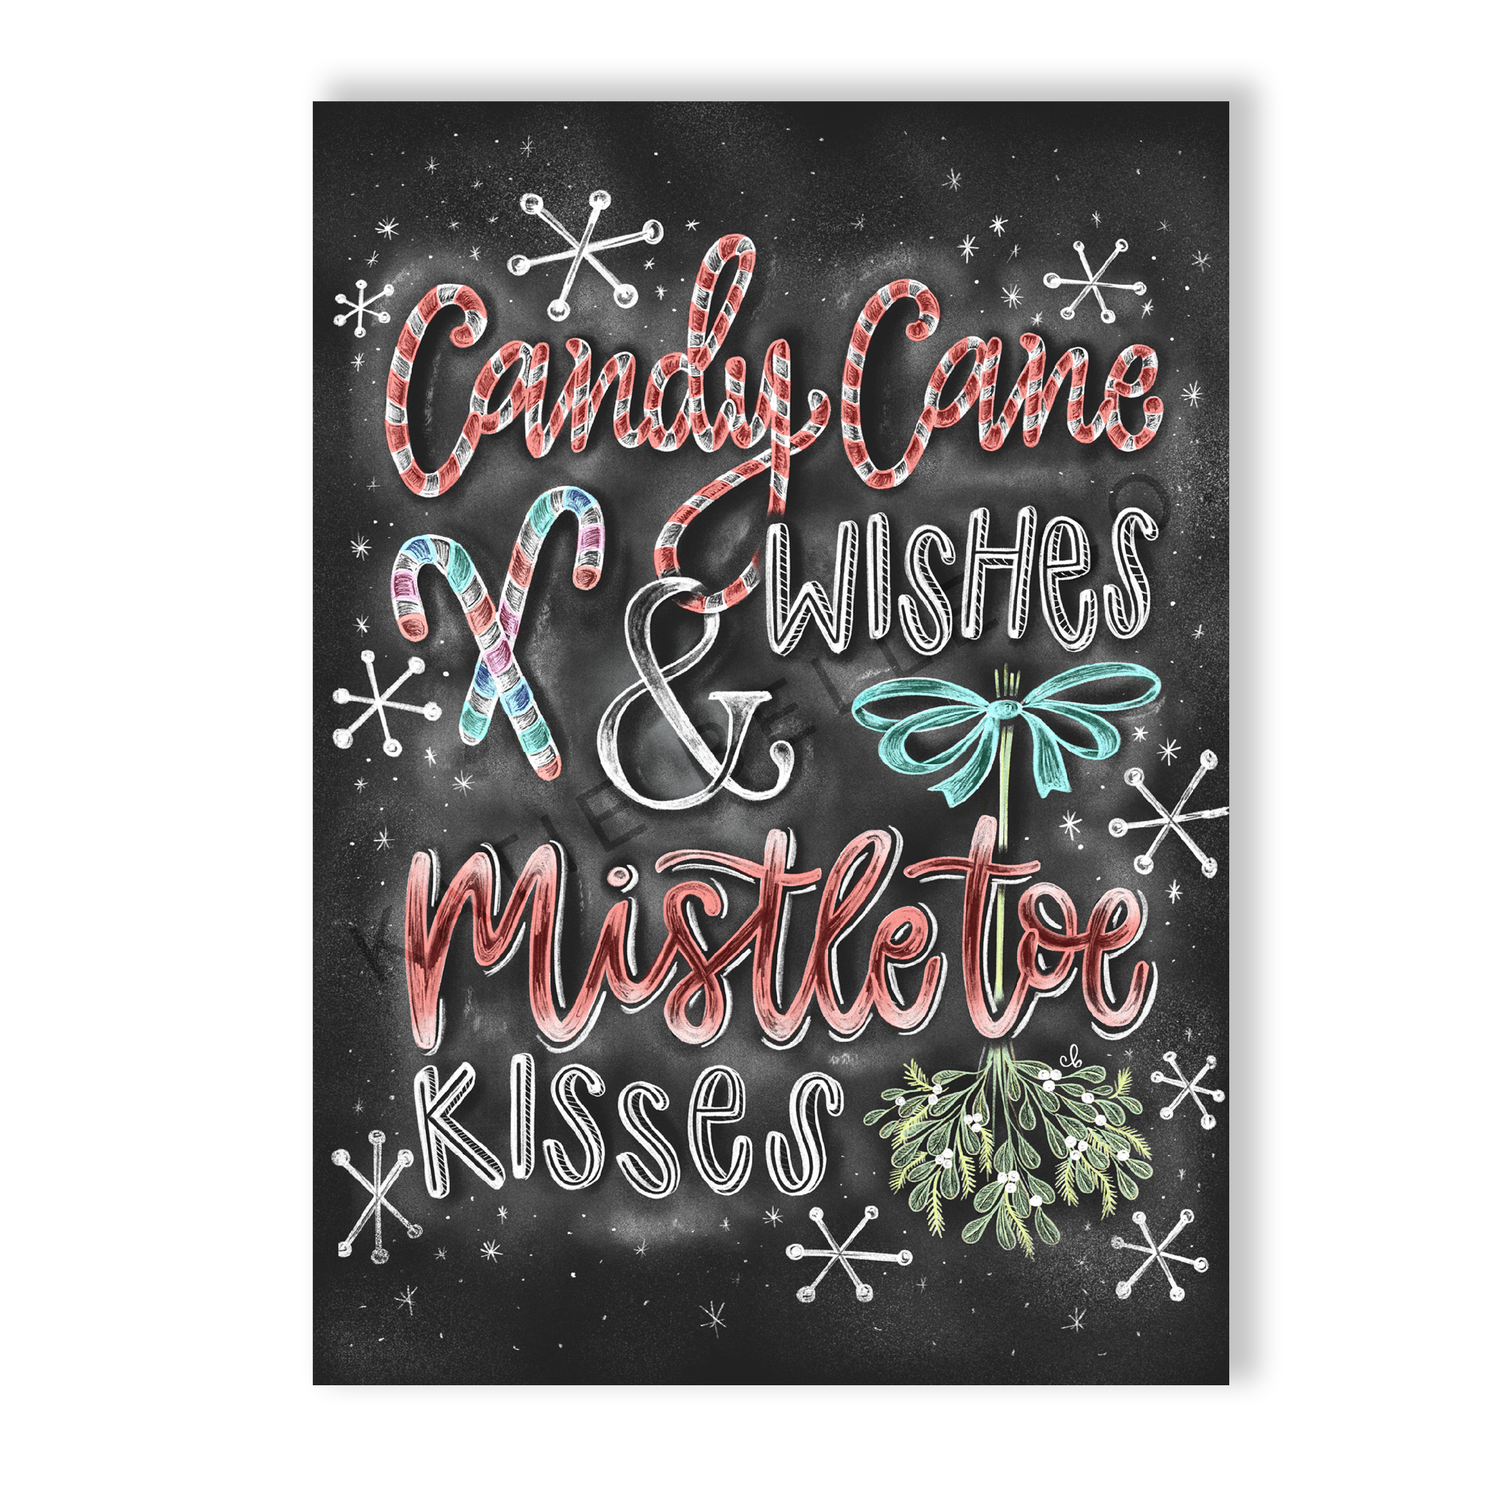 candy cane wishes and mistletoe kisses. mistletoe are. christmas art. christmas decor. christmas gathering. chalkboard print. chalk art. snowflake details. Candy cane font. Hand drawn illustration. katie belle co